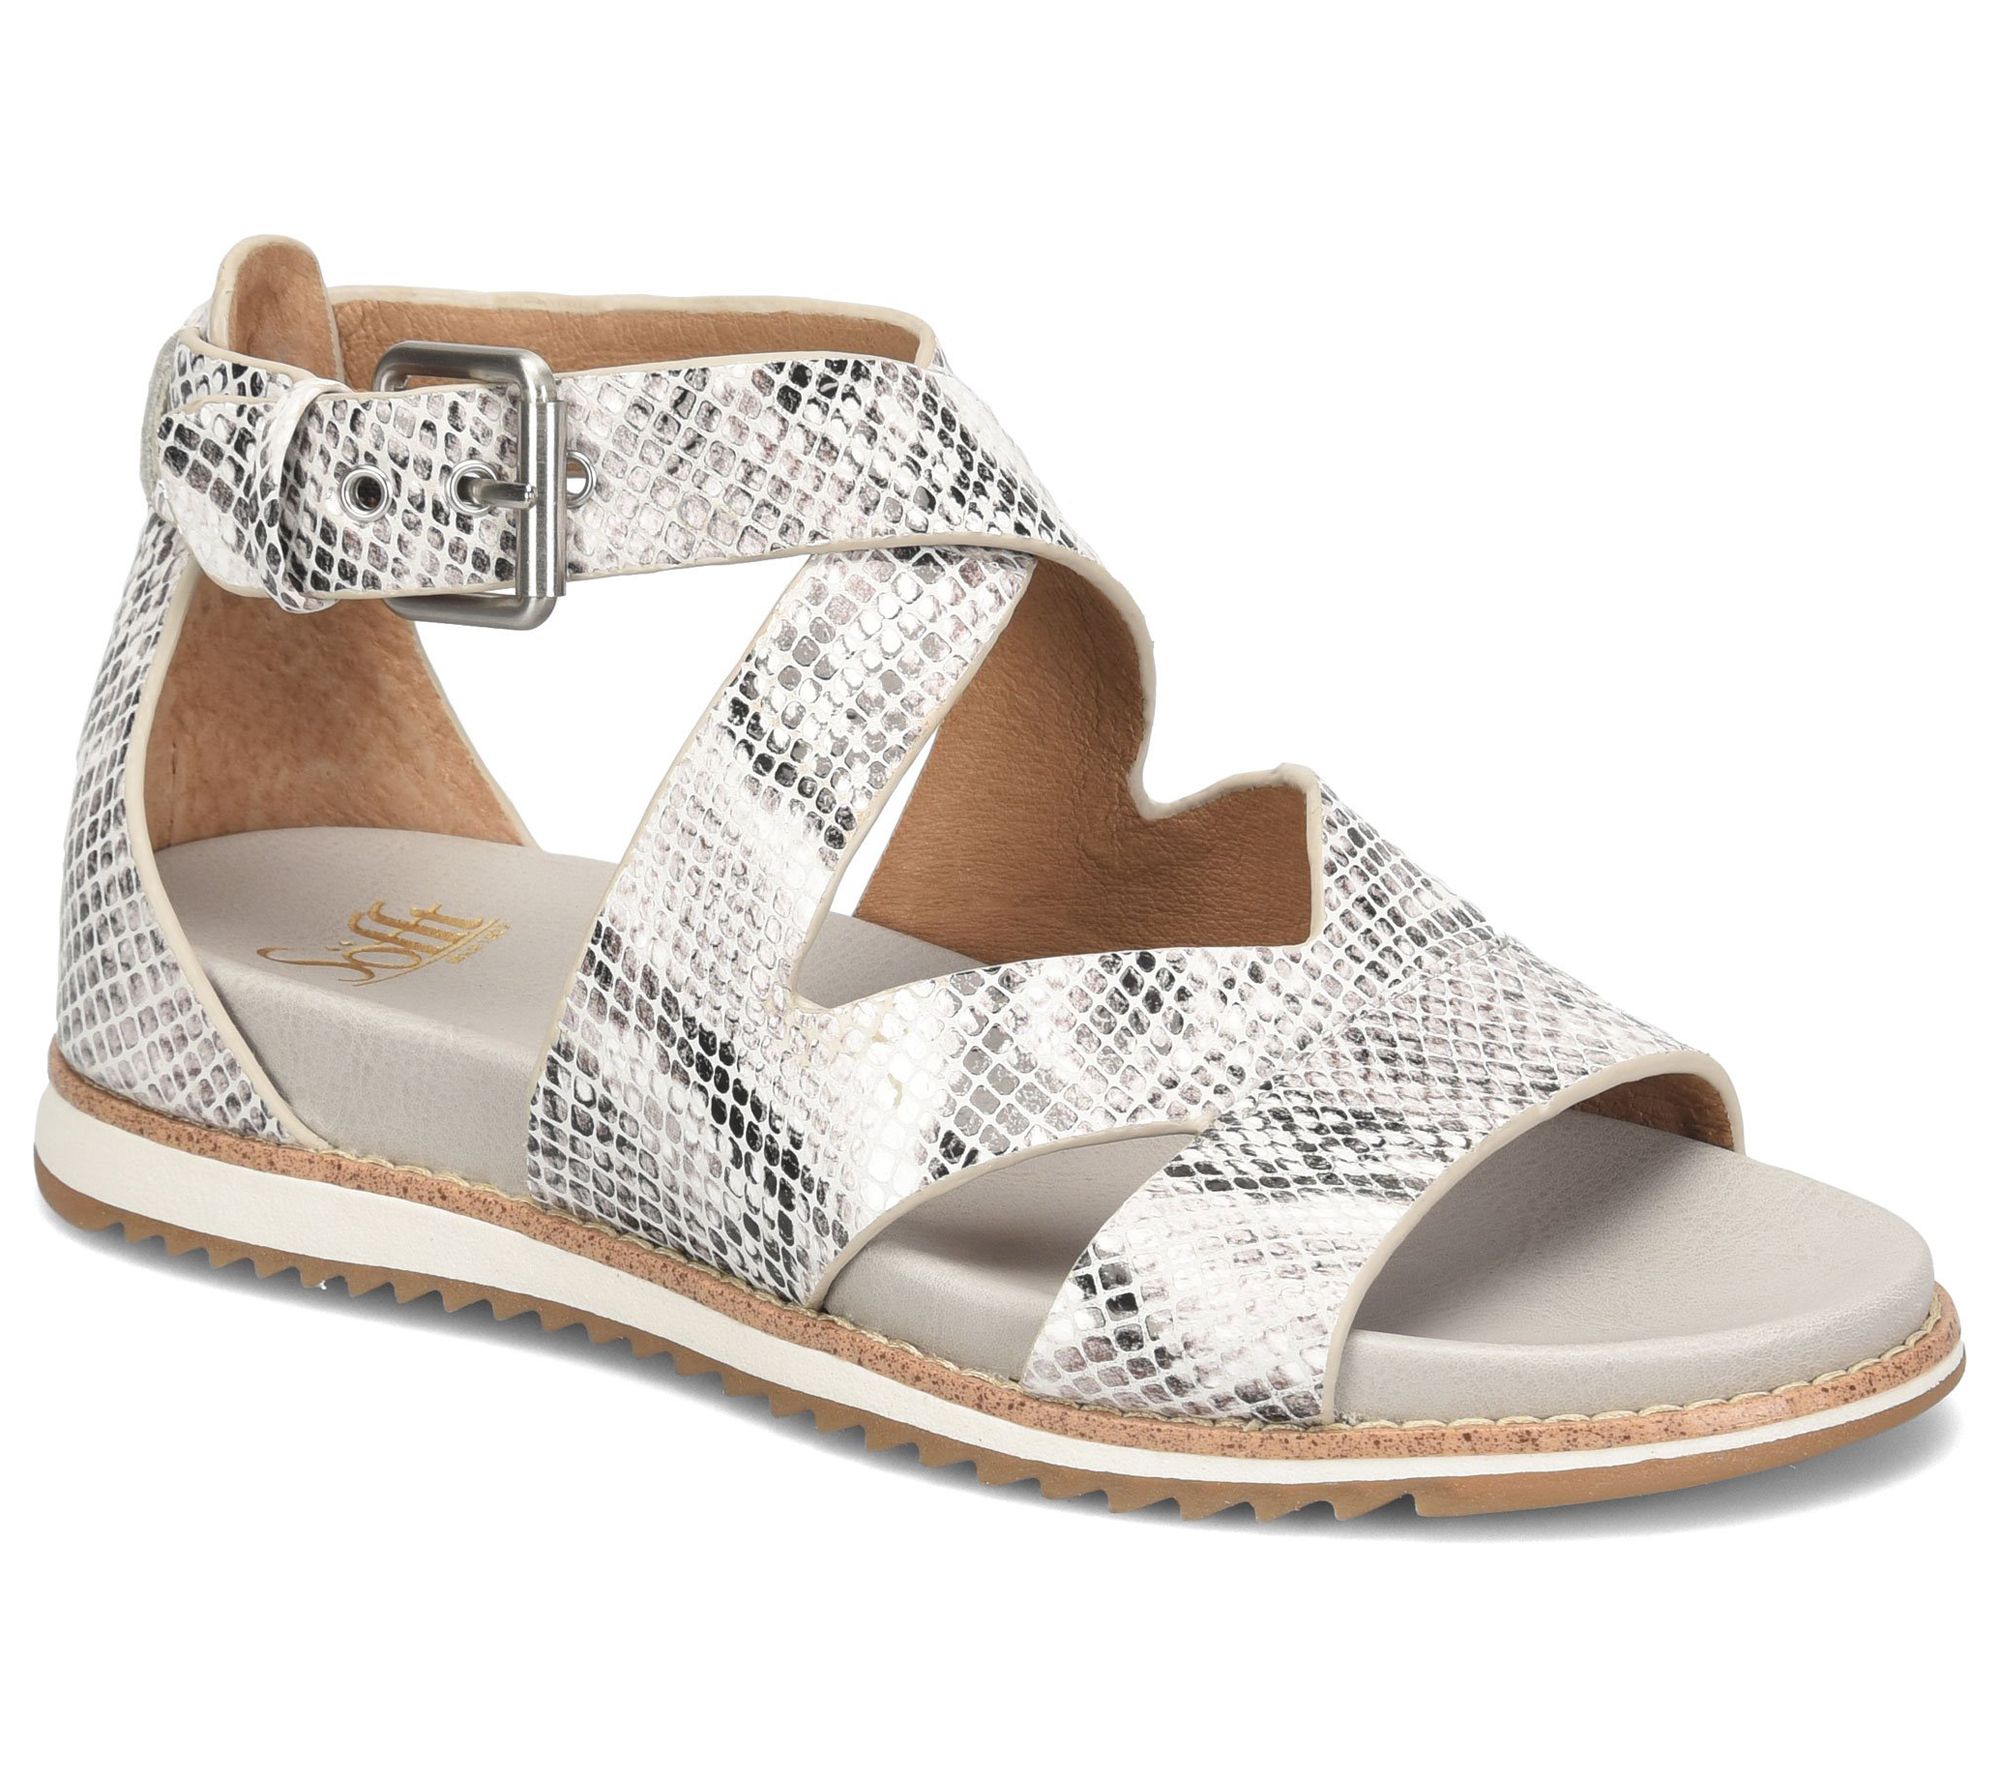 Sofft Leather Sporty Sandals - Mirabelle II - QVC.com